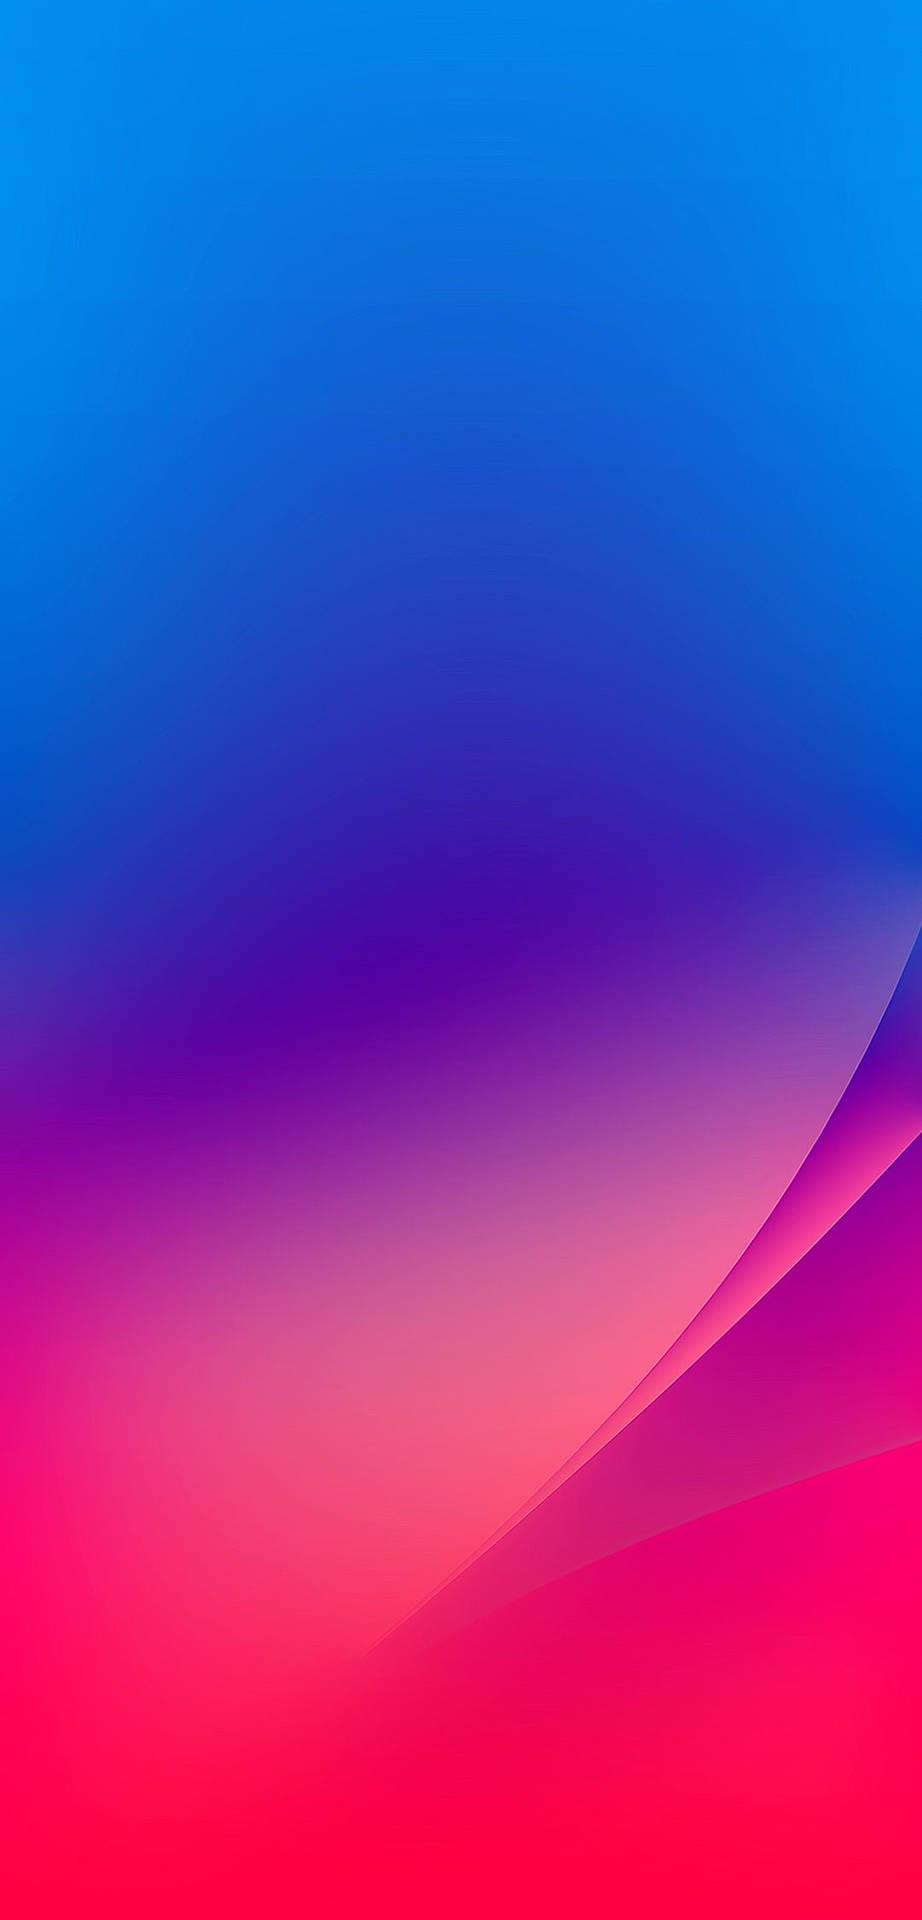 Iphone Xr Blue And Pink Background